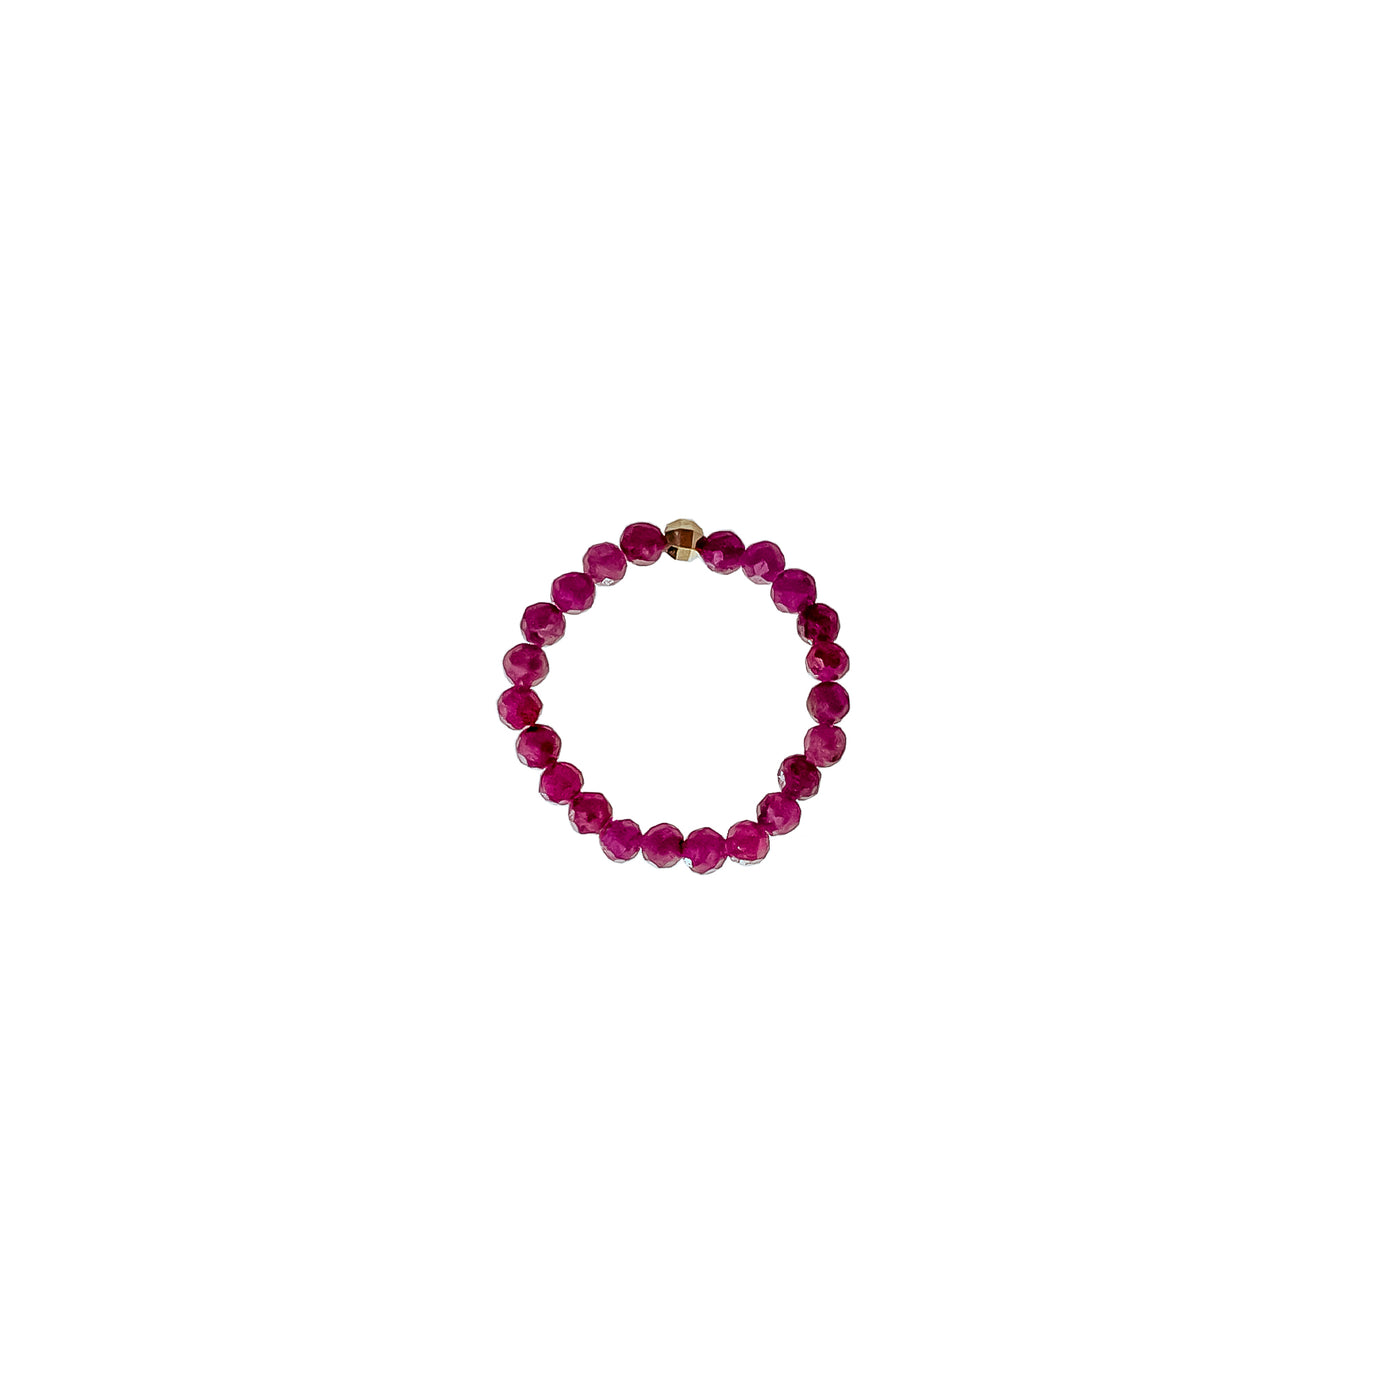 JULY Birthstone: Rubine Women's Delicate Faceted Stretch Ring